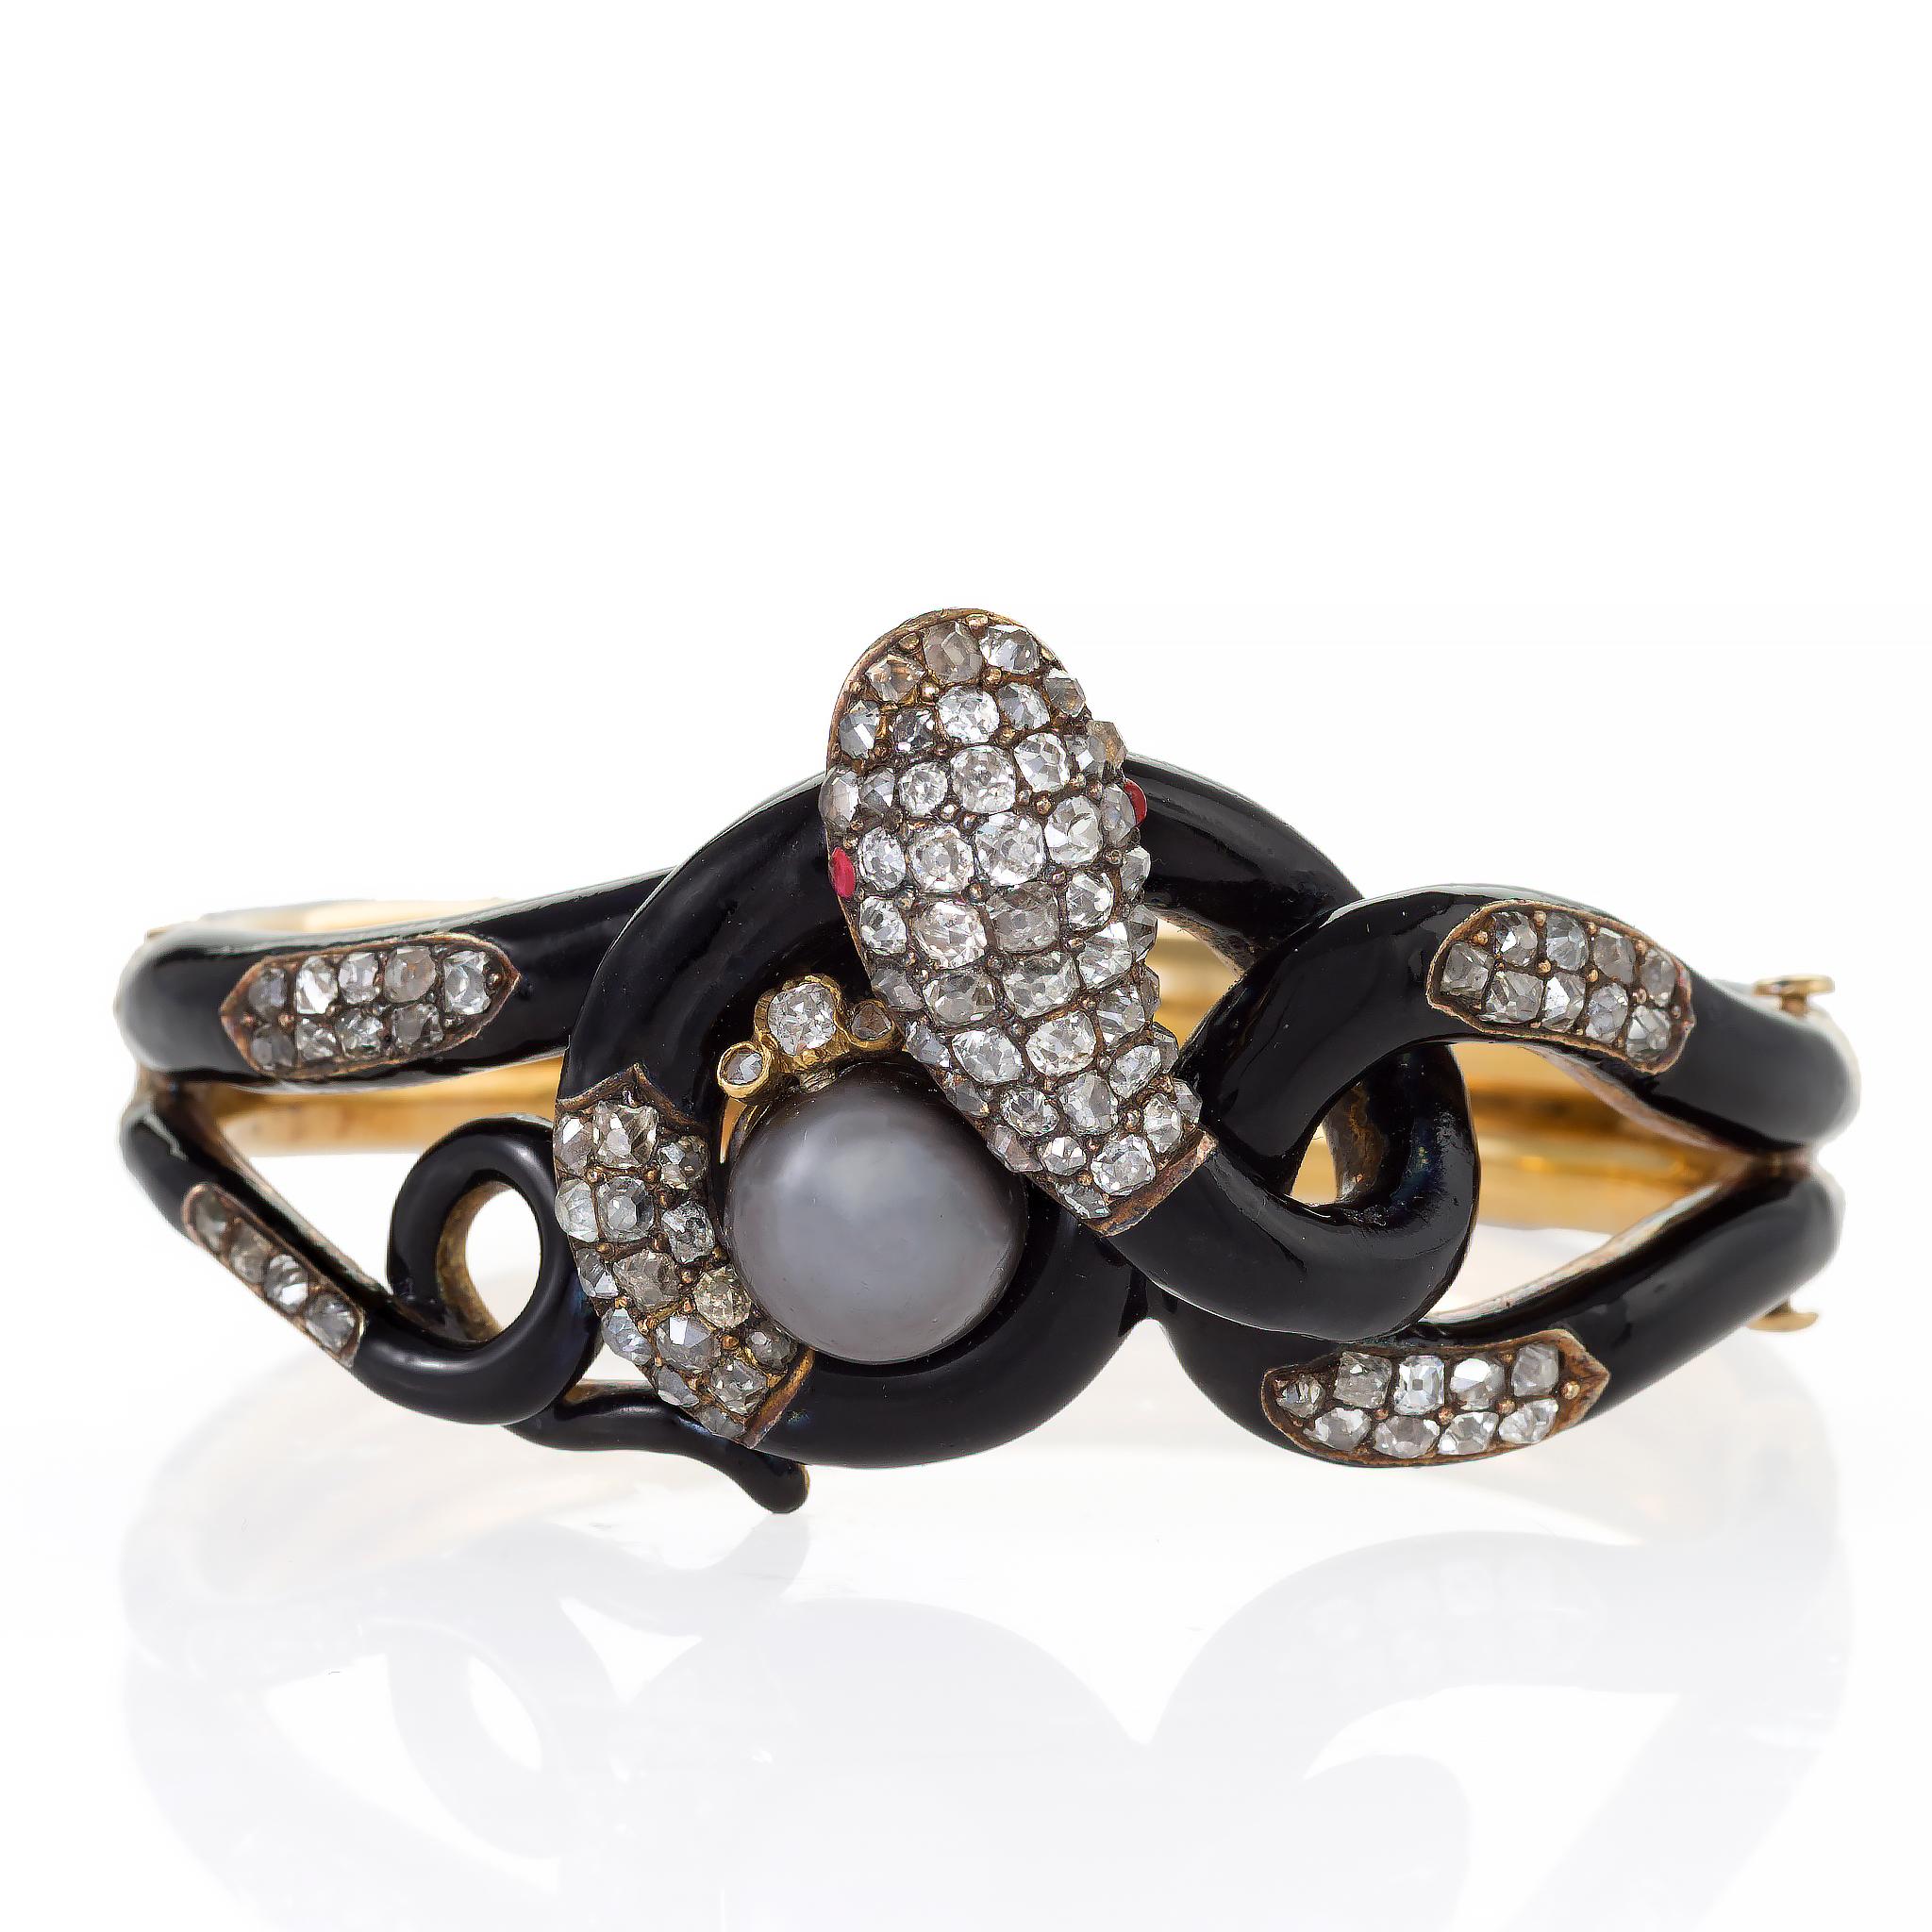 Dating from the mid-19th century, this antique French serpent bangle bracelet is composed of black enamel, natural gray pearl, diamonds, and rubies. It is designed as a highly three-dimensional black enamel snake with ruby eyes, its body patterned